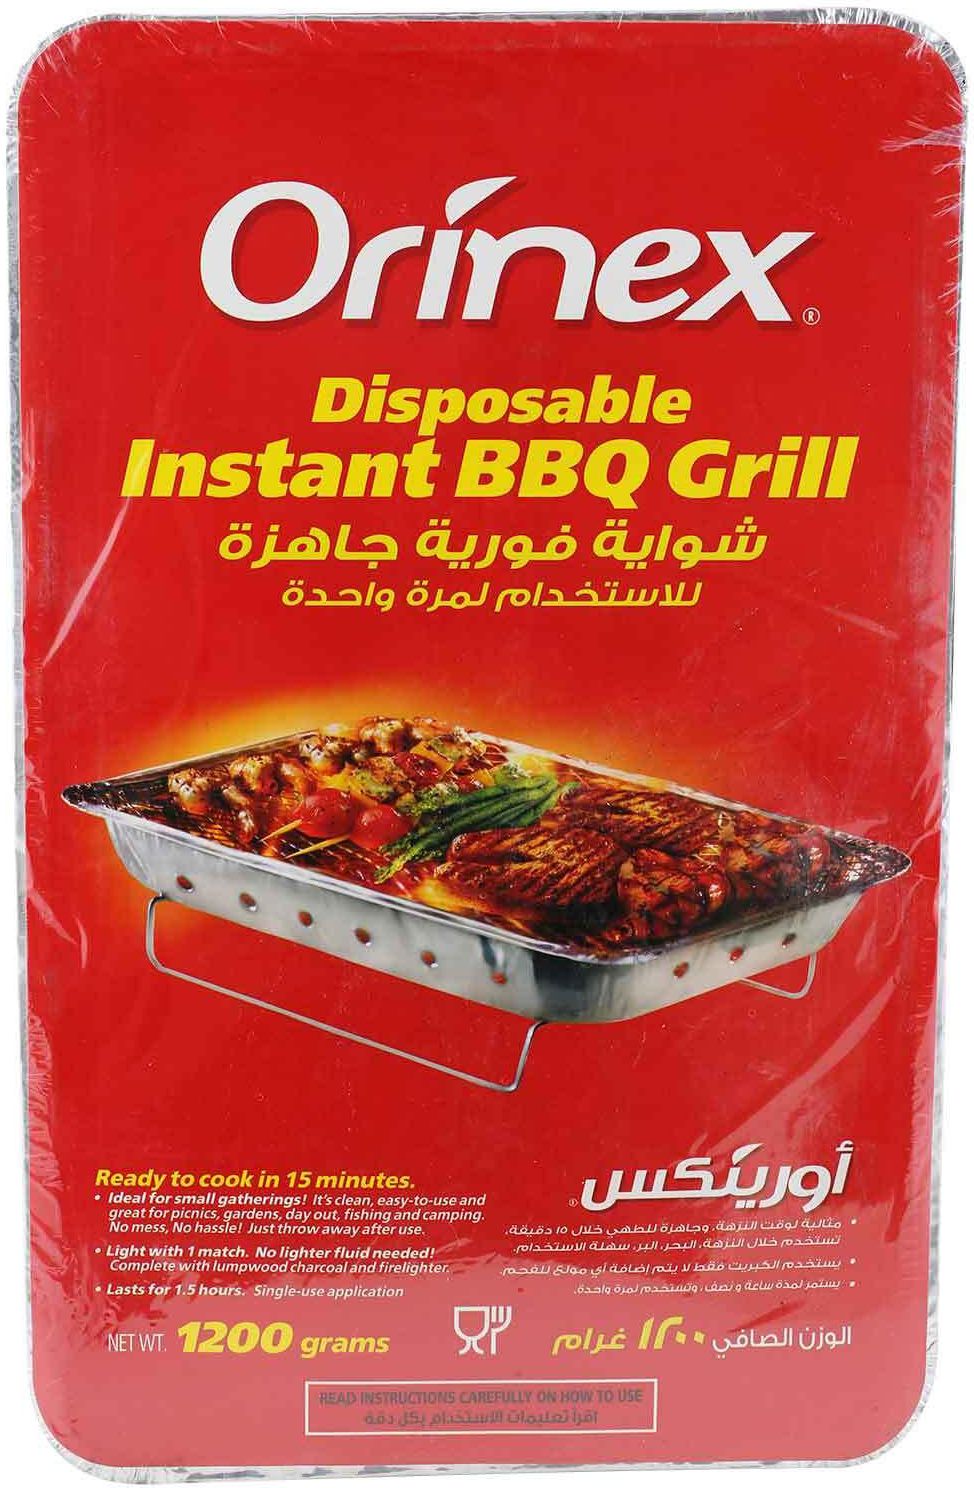 Orinex disposable instant bbq grill 1200 g